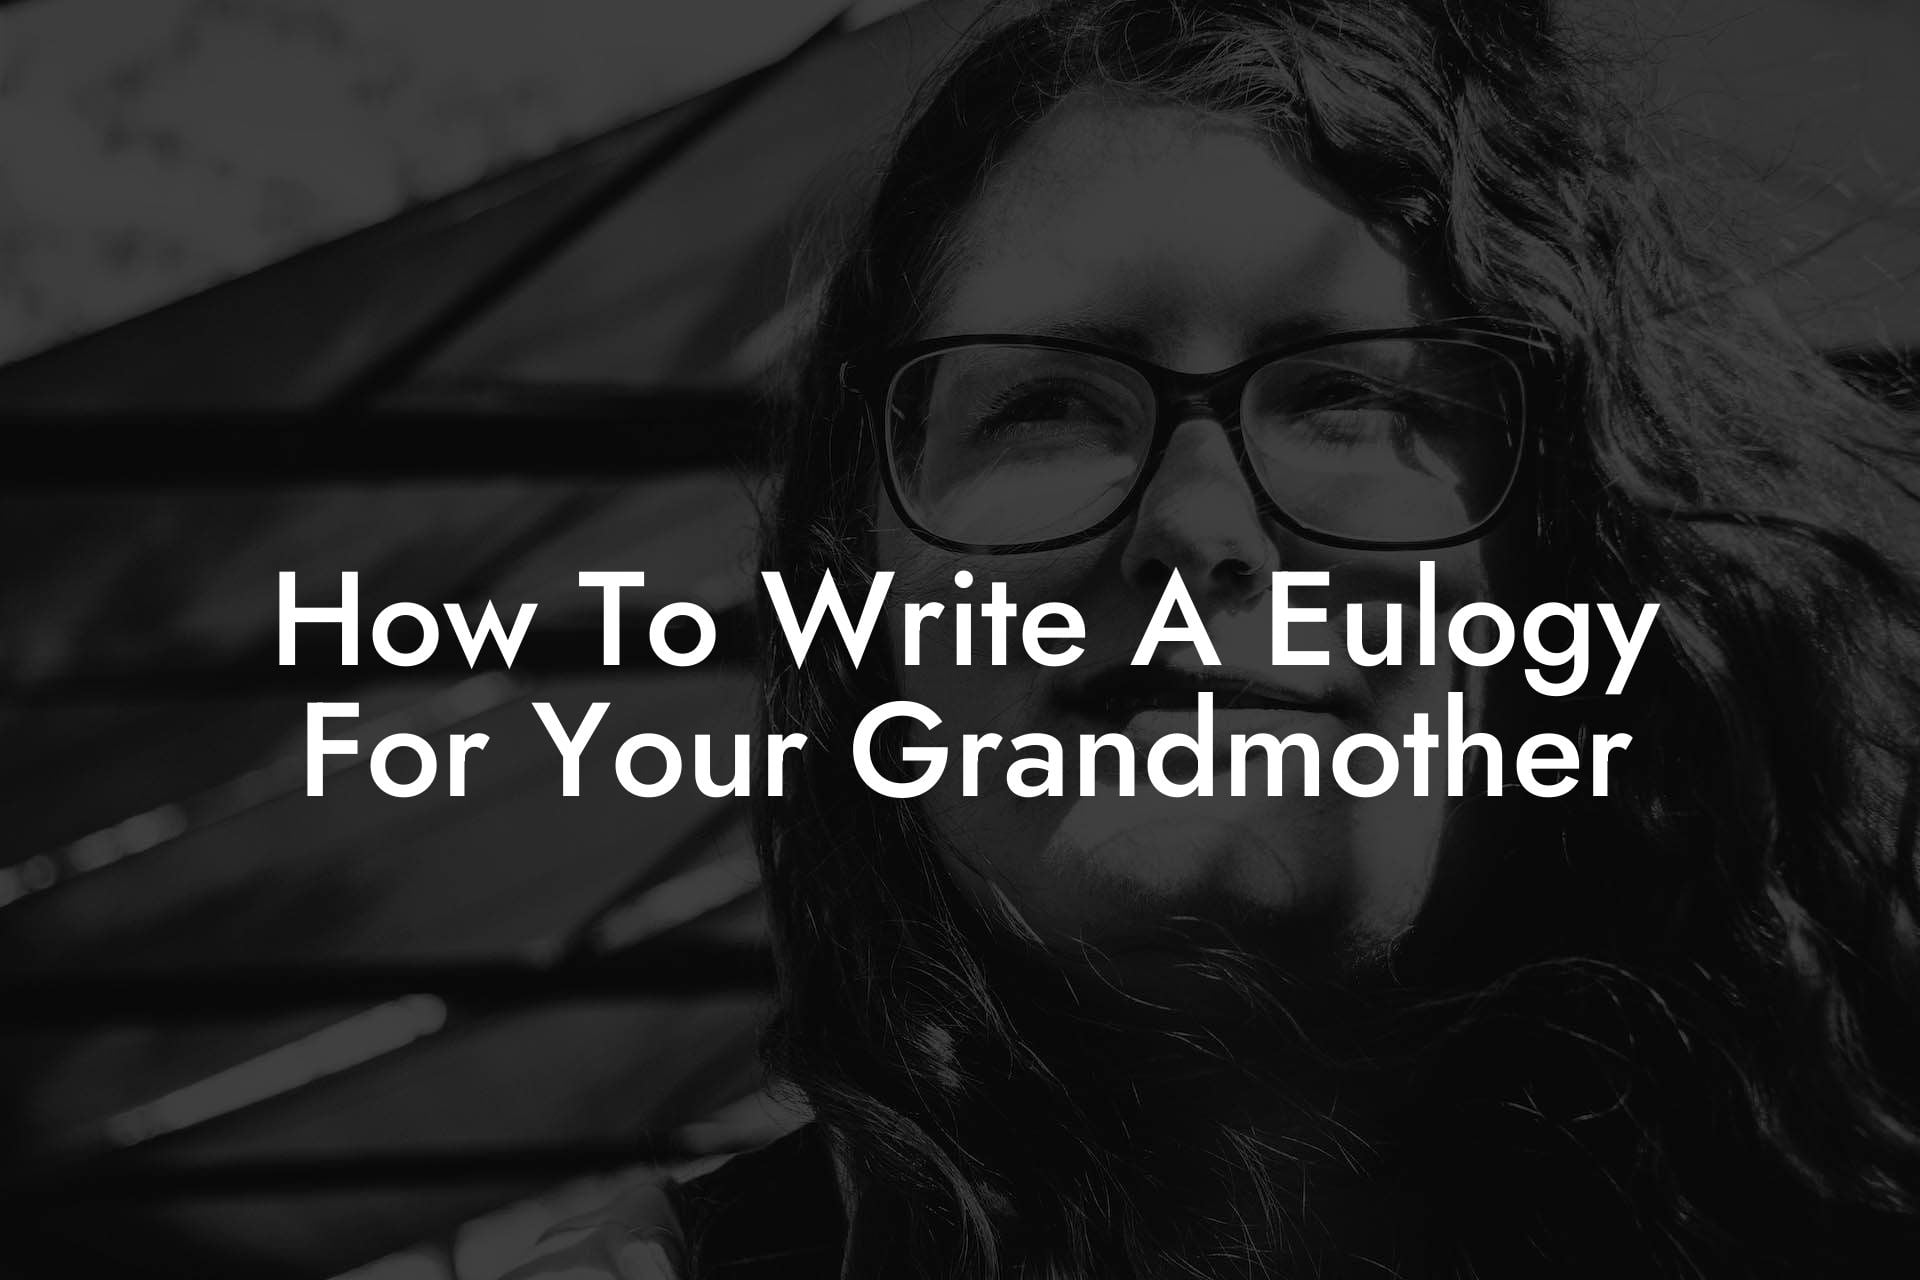 How To Write A Eulogy For Your Grandmother